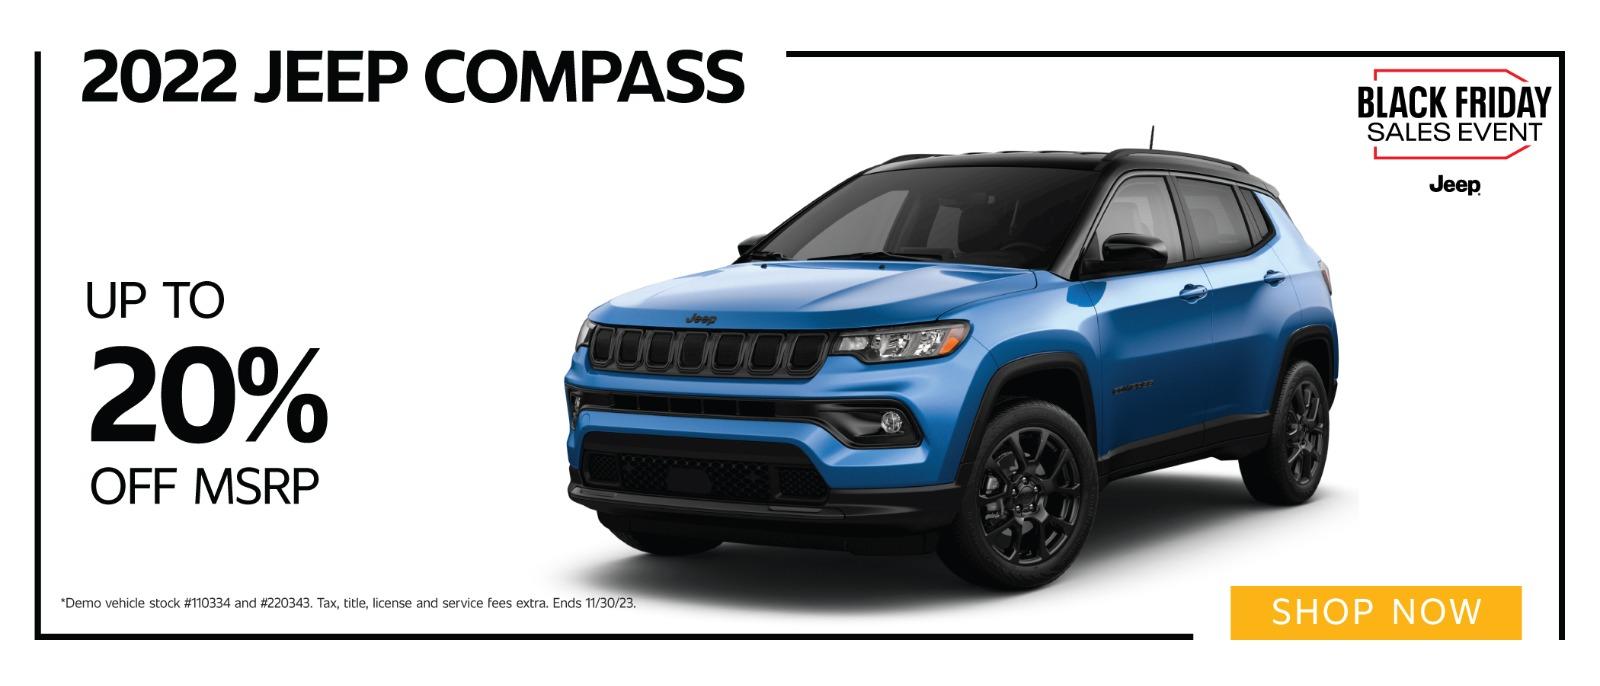 2022 Jeep Compass up to 20% OFF MSRP